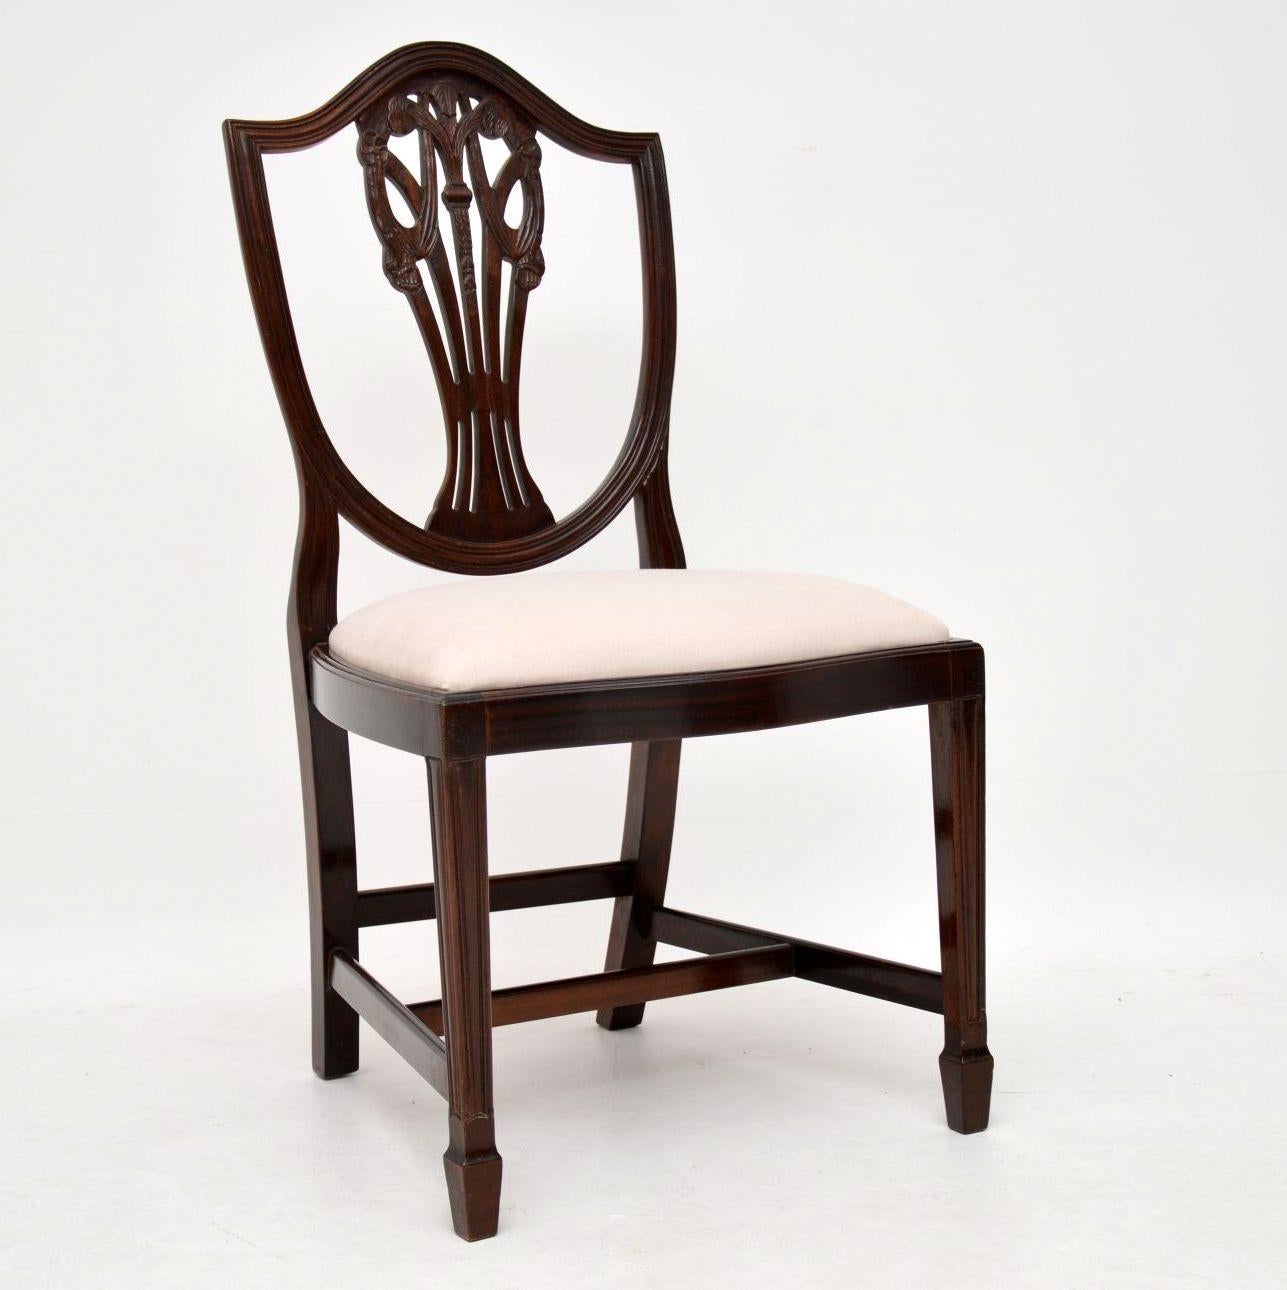 Set of eight antique Sheraton style dining chairs in mahogany including two with arms. They are in good condition, having just been French polished and I would date them to circa 1930s-1950s period. The drop in seats have just been re-upholstered in